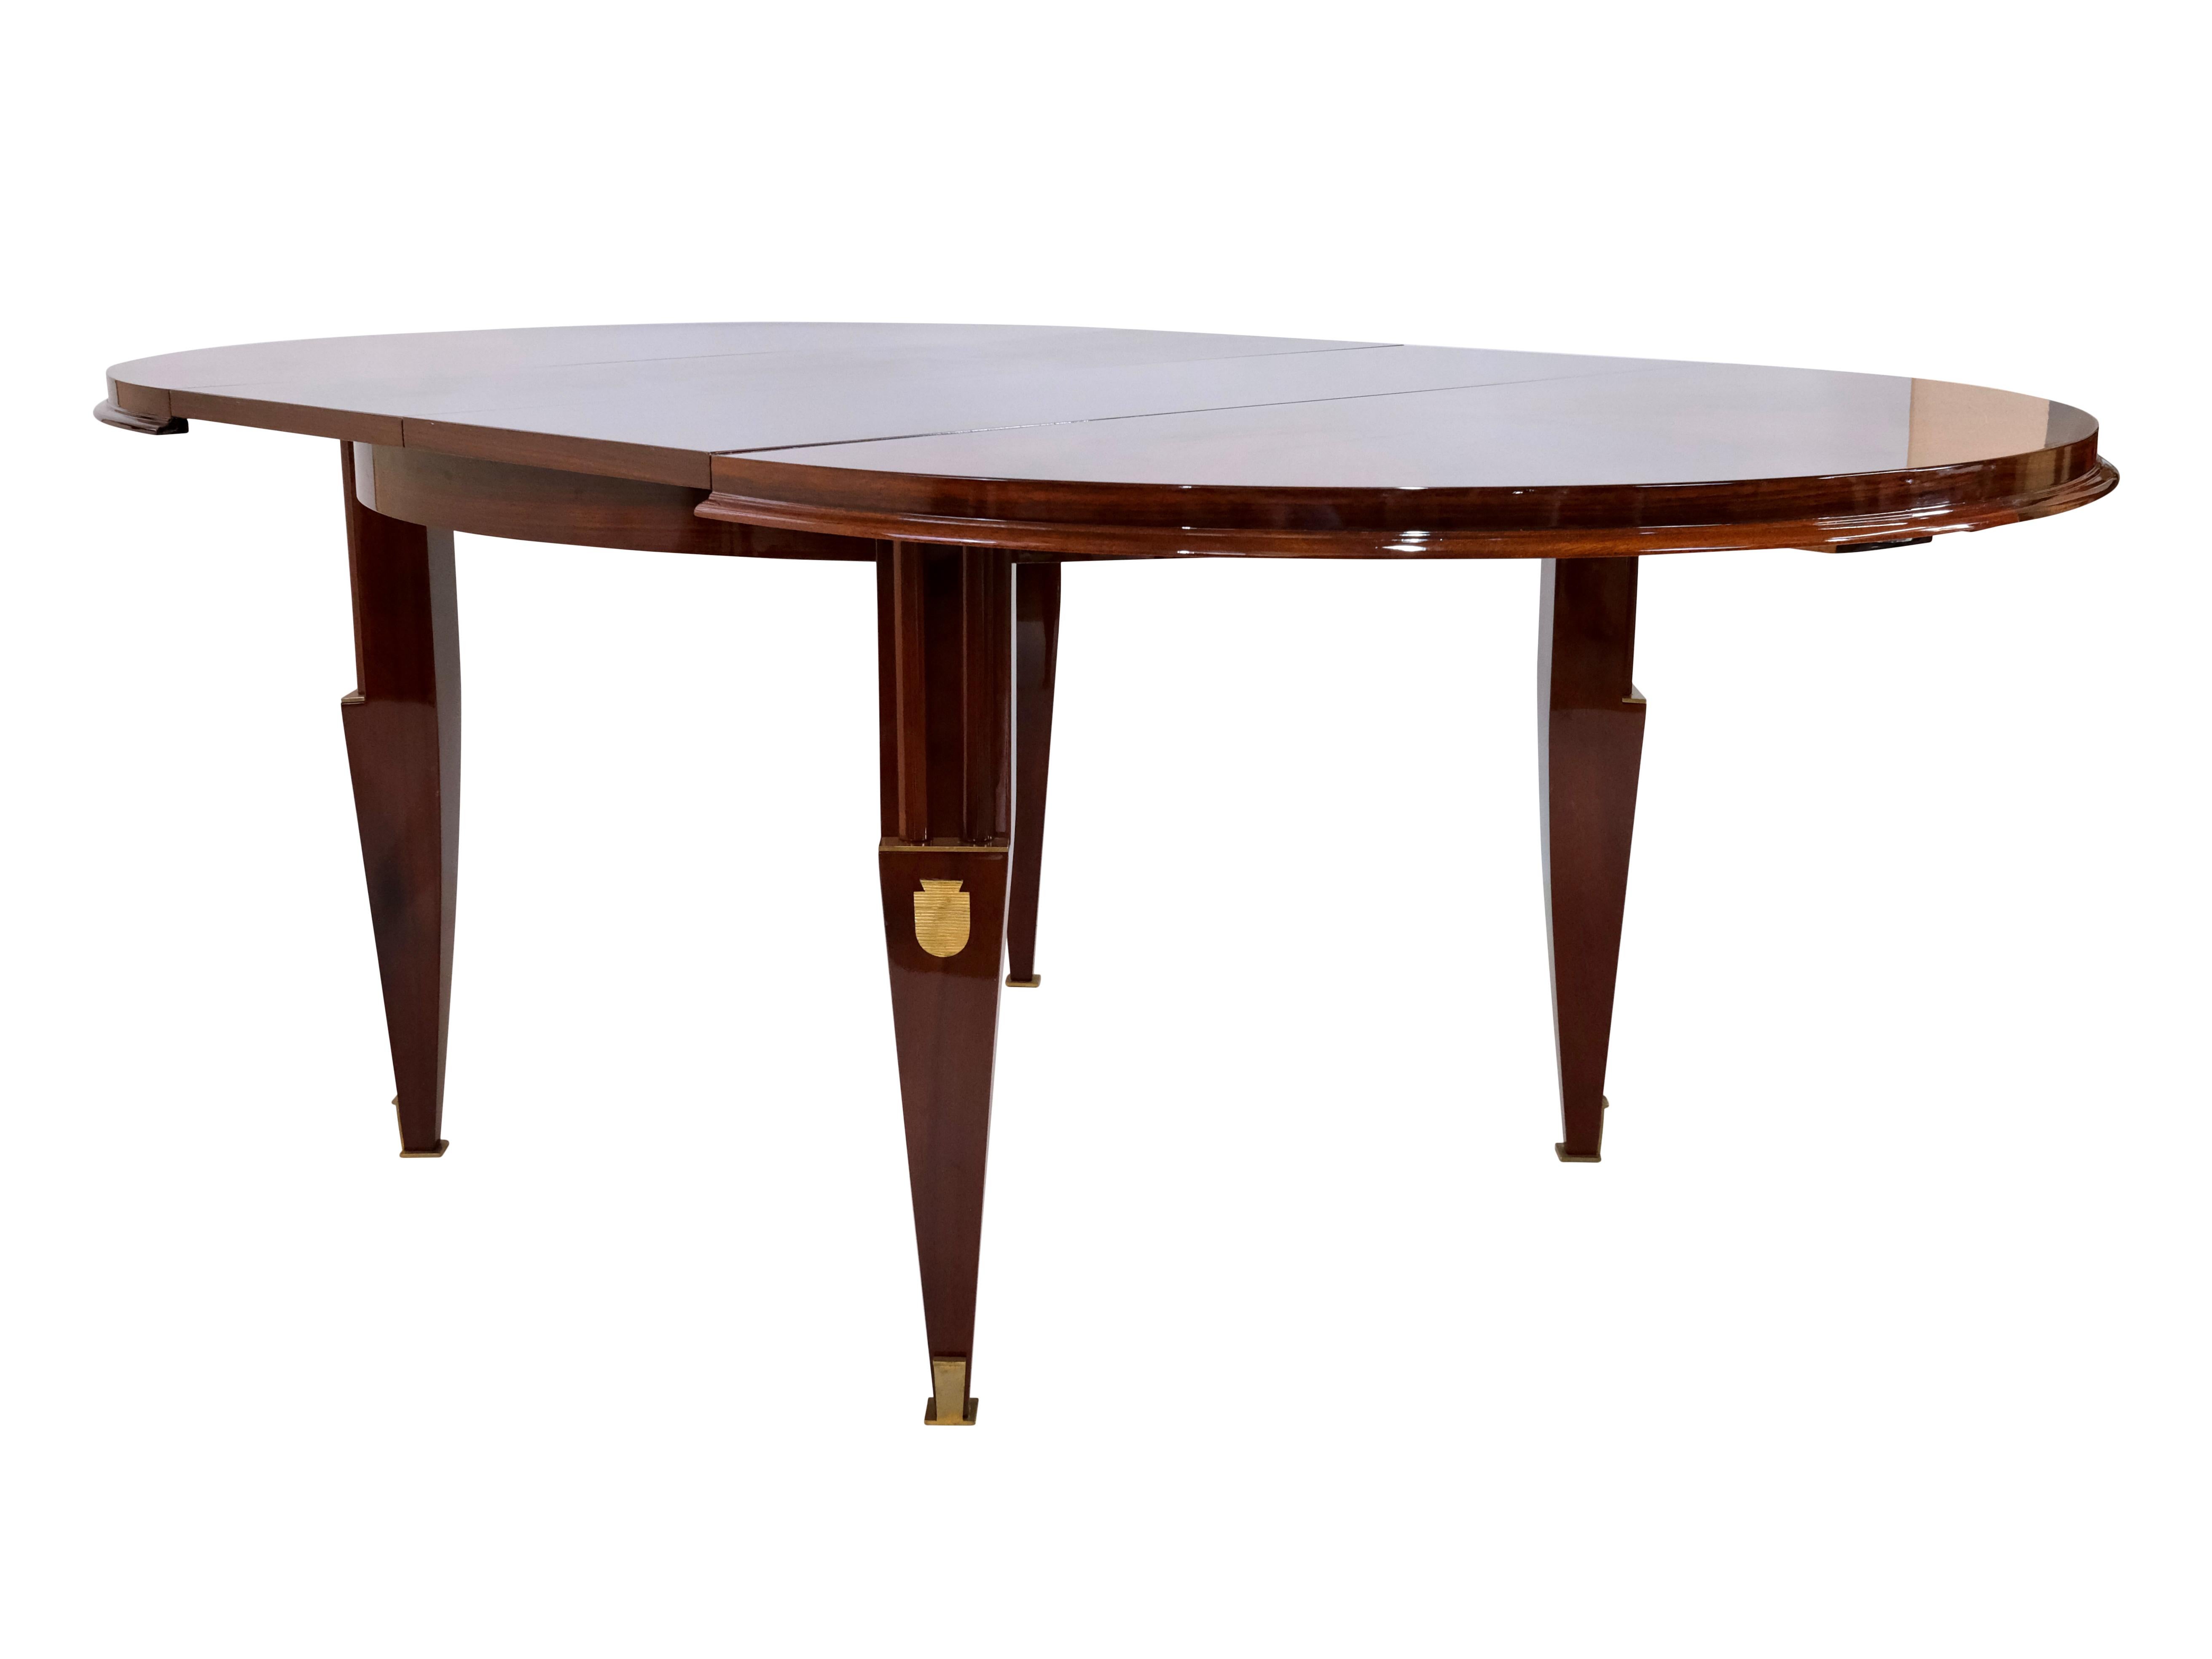 1930s Round Art Deco Dining or Center Table in Mahogany with Brass Fittings 3